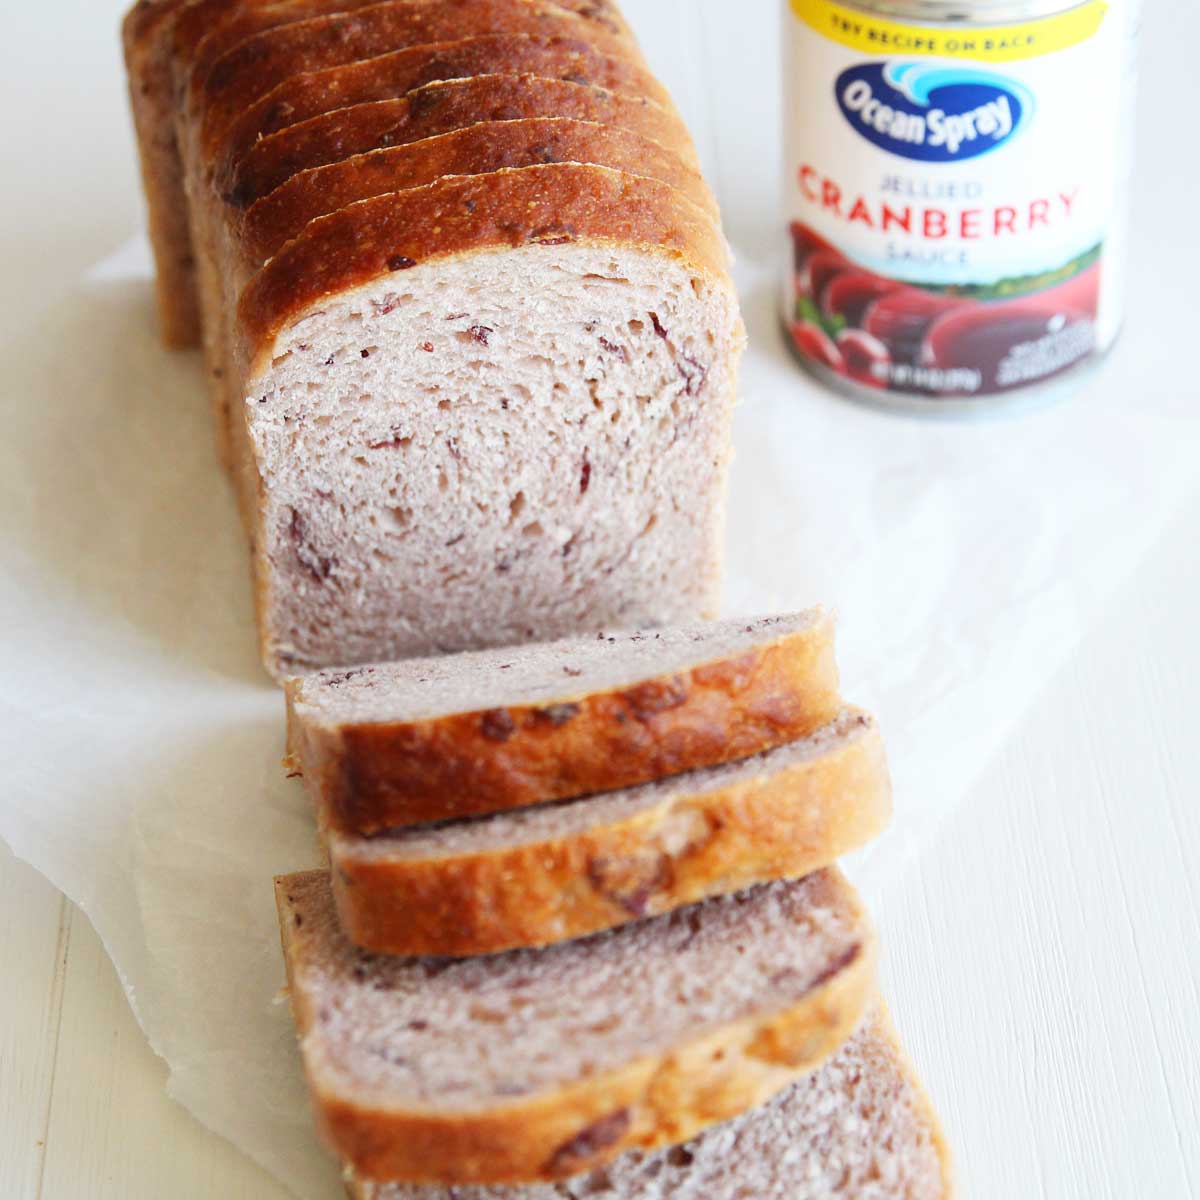 Cranberry Yeast Bread Loaf (An Easy, Vegan Recipe w/ Canned Cranberry Sauce) - Ricotta Cheese Hot Cross Buns